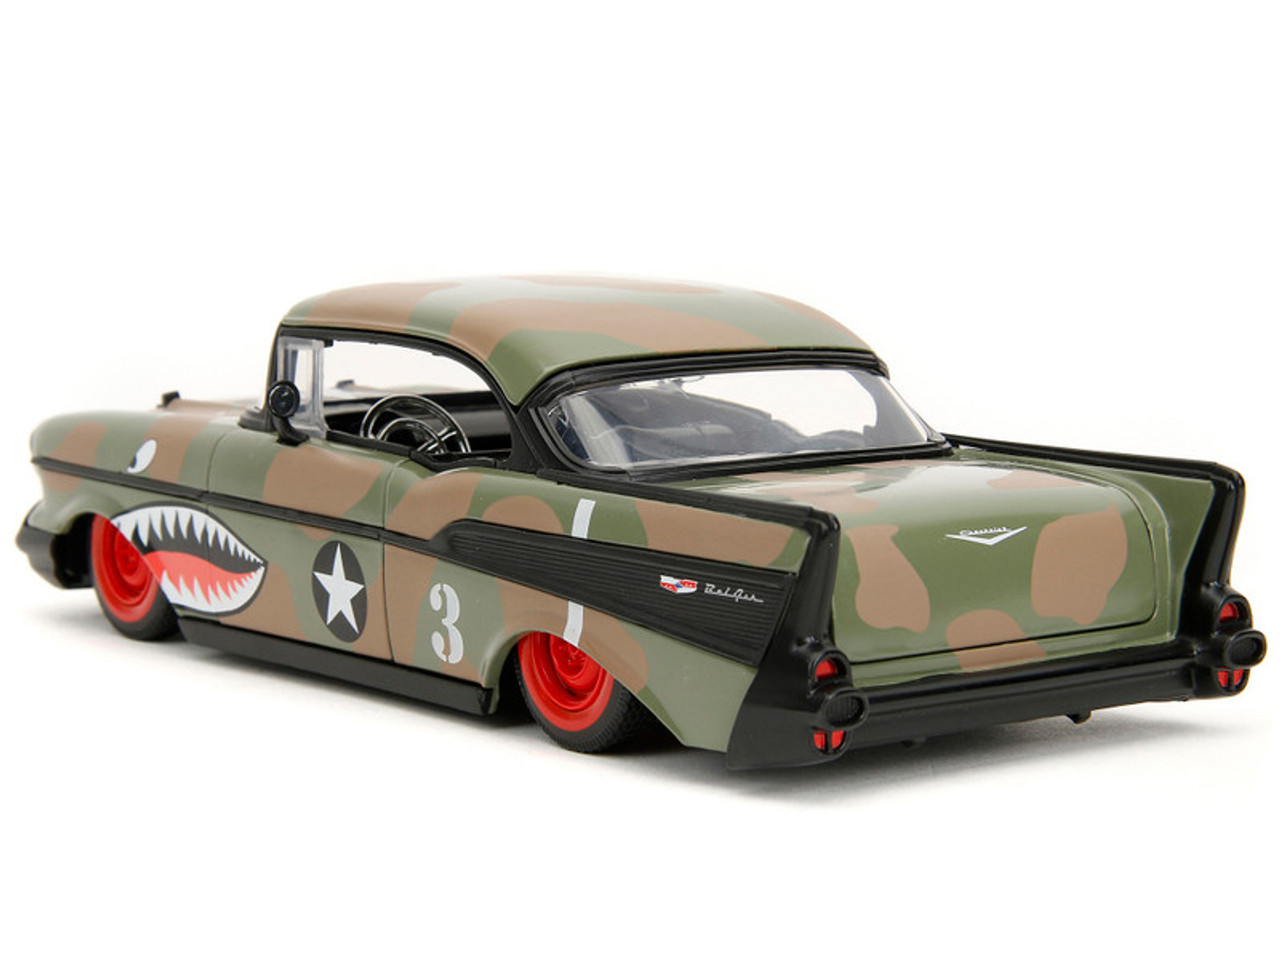 1957 Chevrolet Bel Air #3 Camouflage with Shark Mouth Graphics "Bigtime Muscle" Series 1/24 Diecast Model Car by Jada